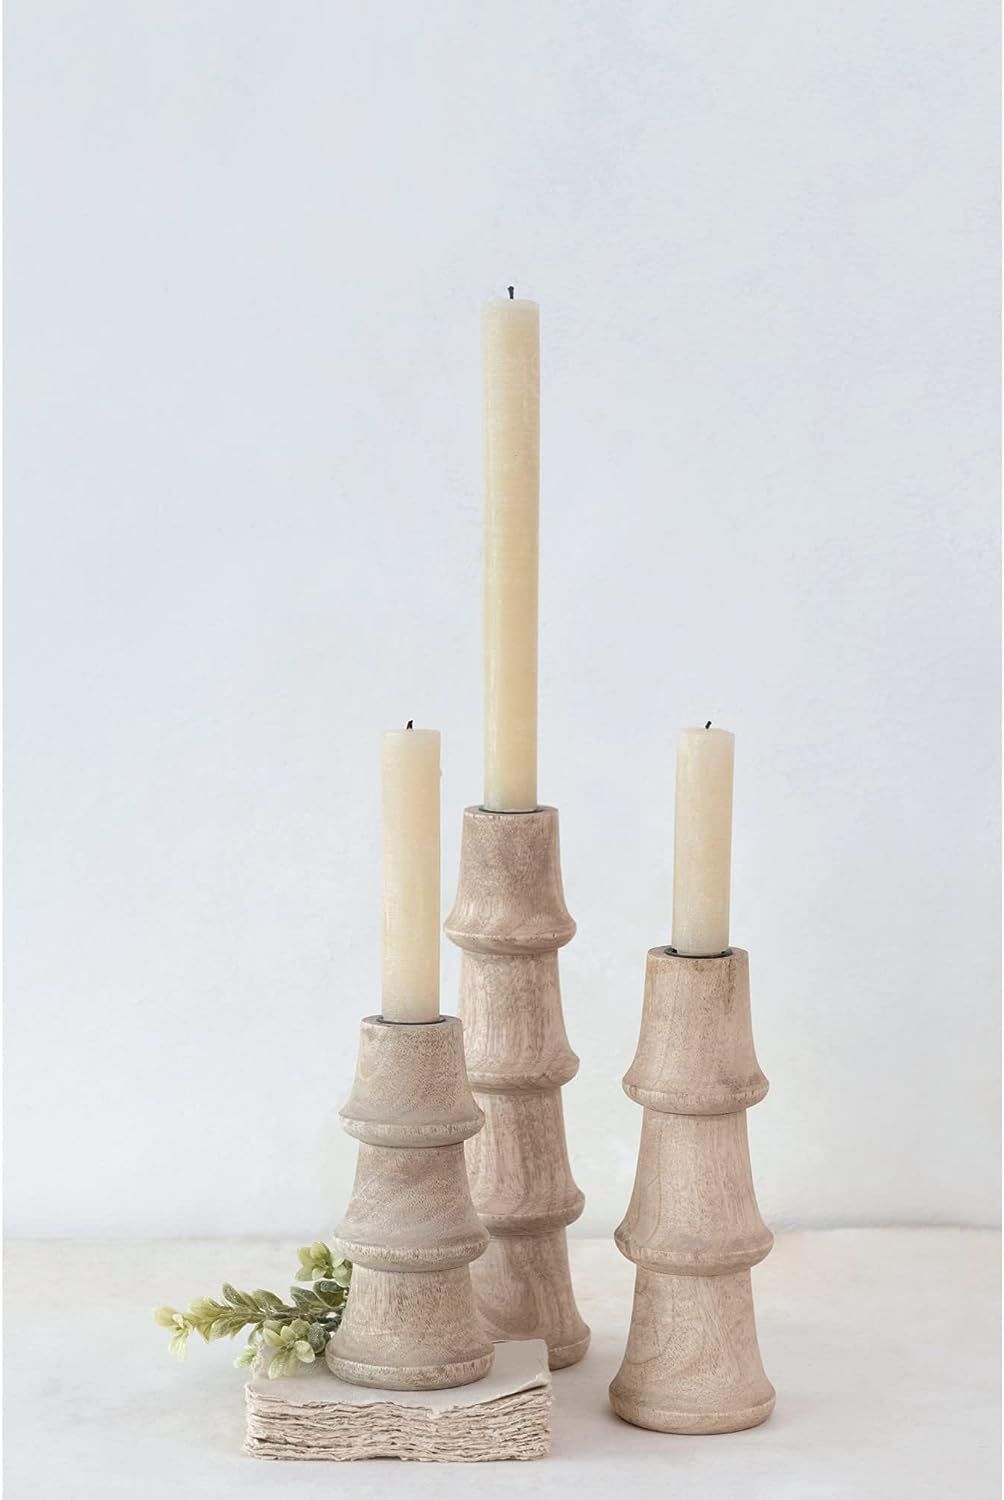 Creative Co-Op Hand-carved Mango Wood Taper Candle Holder | Amazon (US)